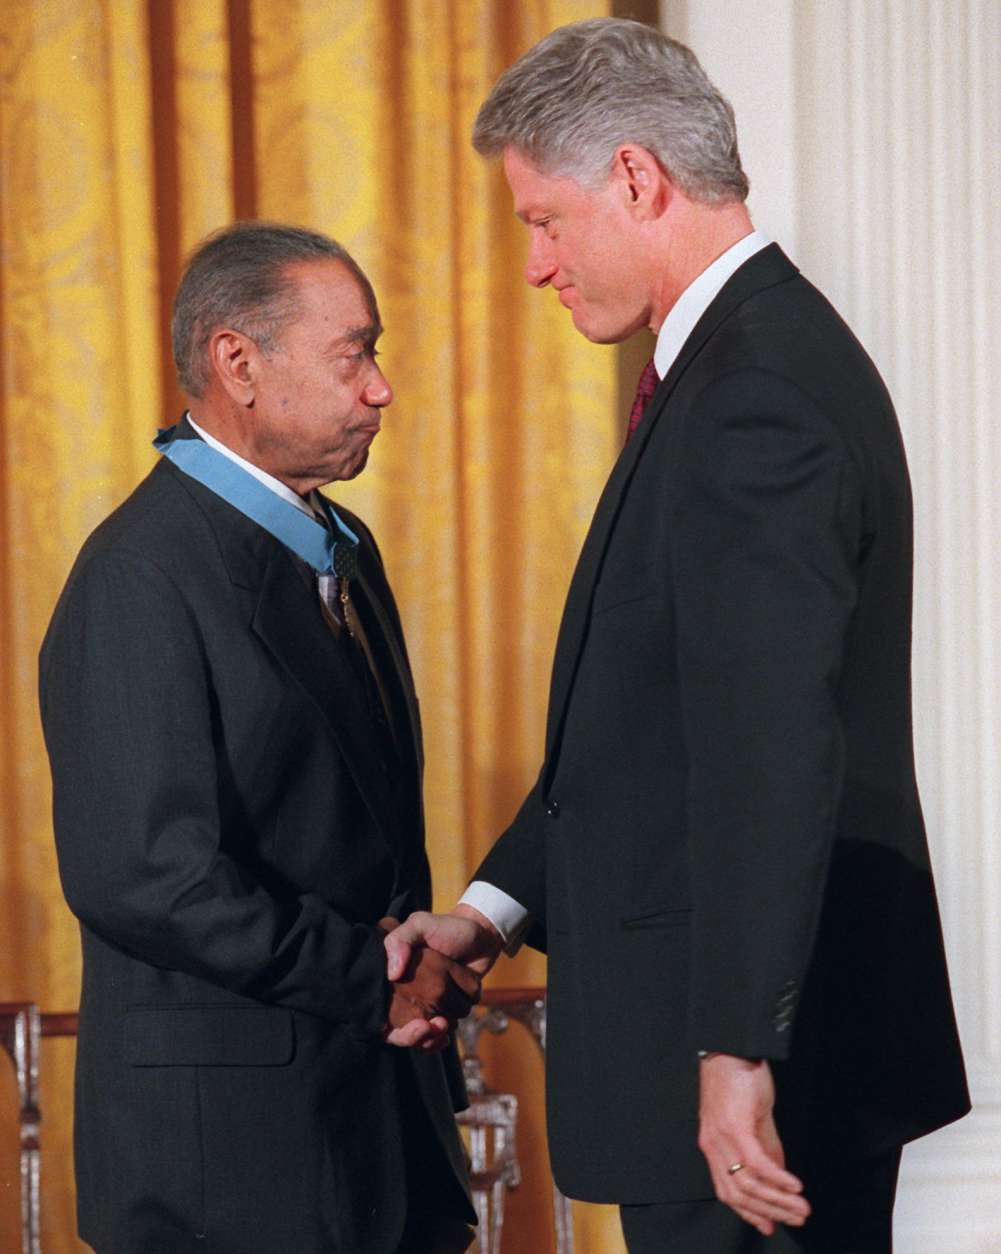 President Clinton shakes hands with Vernon Baker after presenting him with a Medal of Honor, Monday Jan. 13, 1997 at the White House. In a long-awaited ceremony, Baker and six other  World War II veterans became the first black soldiers of that conflict to receive the medal. Baker is the sole survivor of the group. (AP Photo/Ruth Fremson)